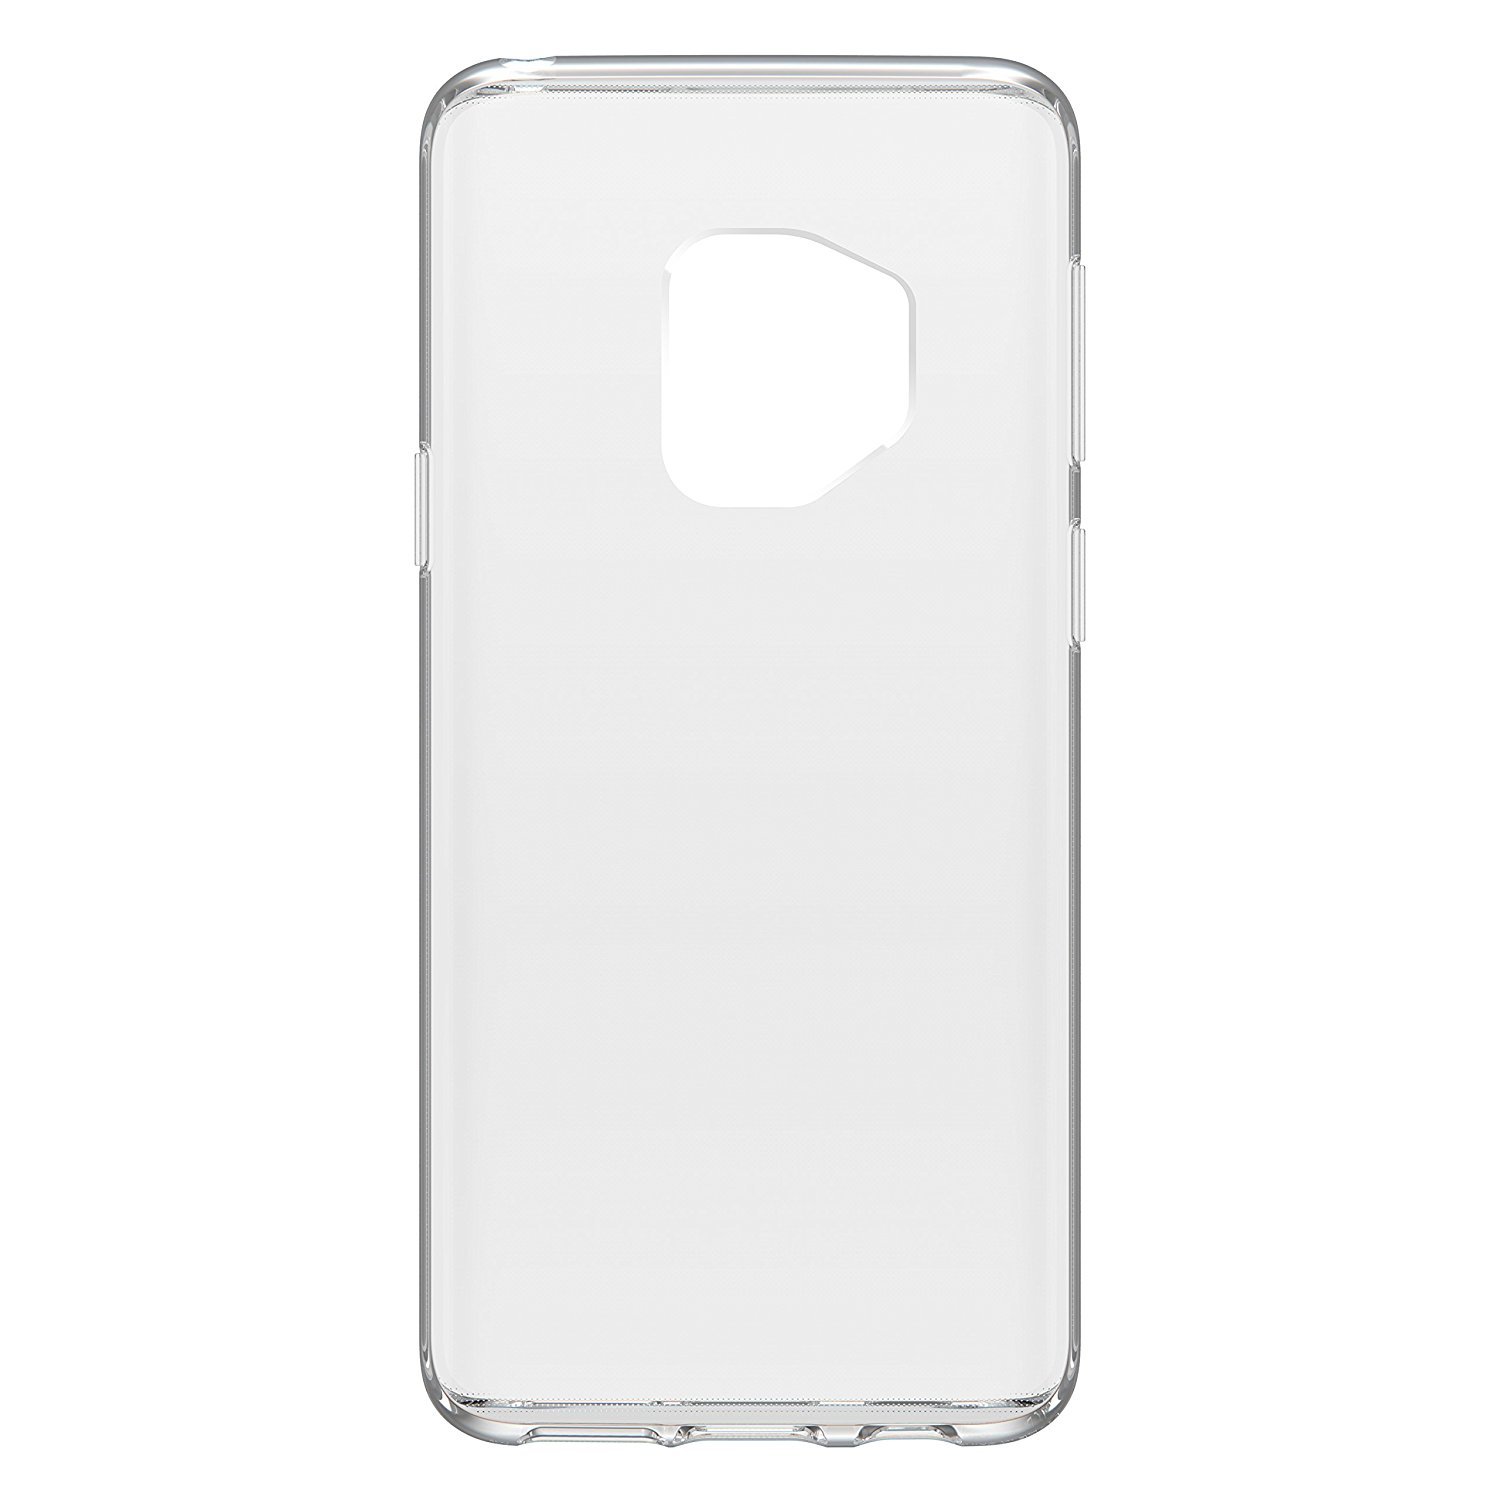 OtterBox Clearly Protected Skin Samsung Galaxy S9 Case - Clear